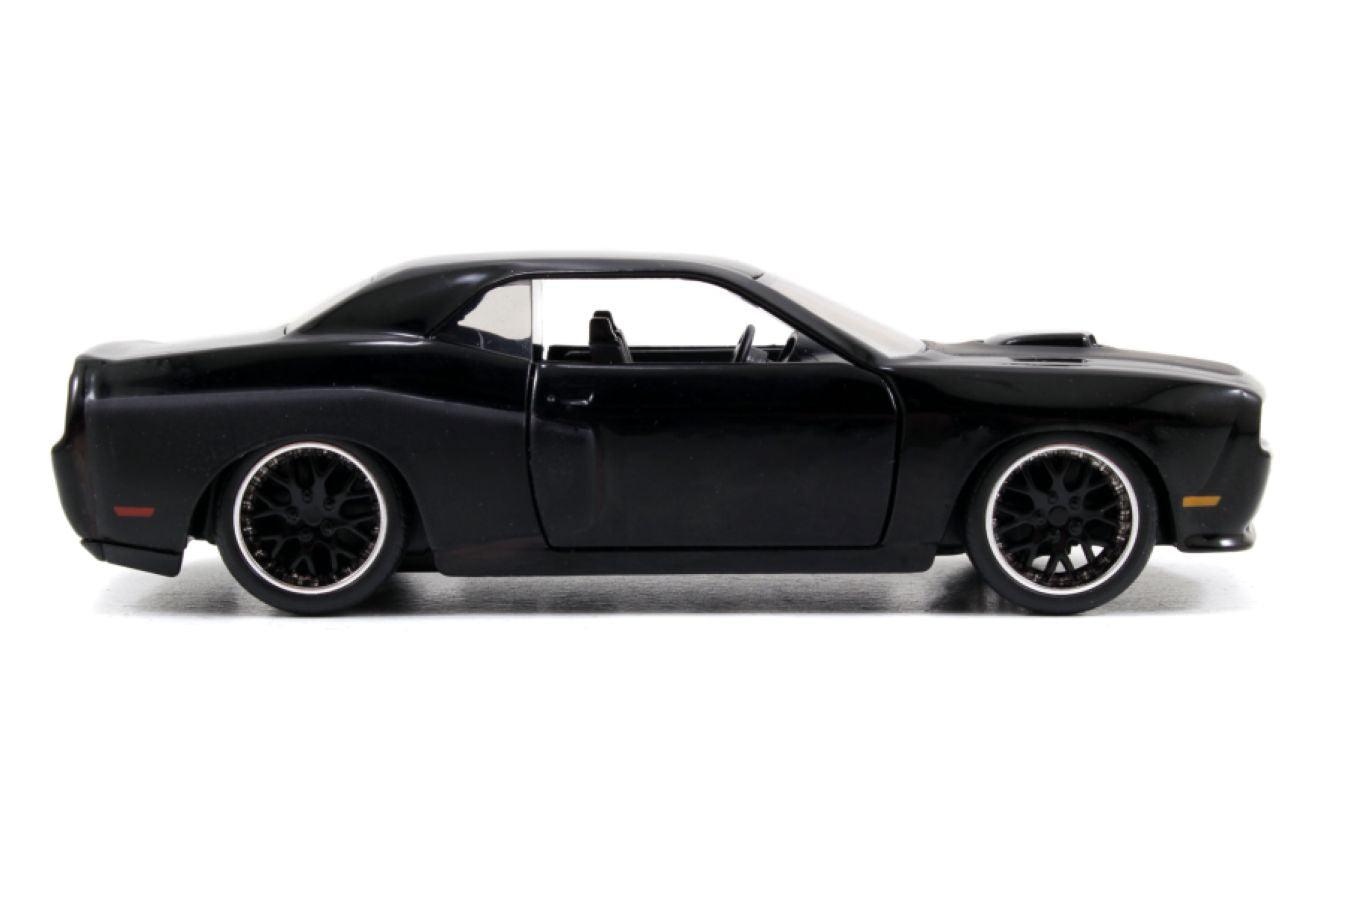 JAD97384 Fast and Furious - 2012 Dodge Challenger SRT8 1:32 Scale Hollywood Ride - Jada Toys - Titan Pop Culture